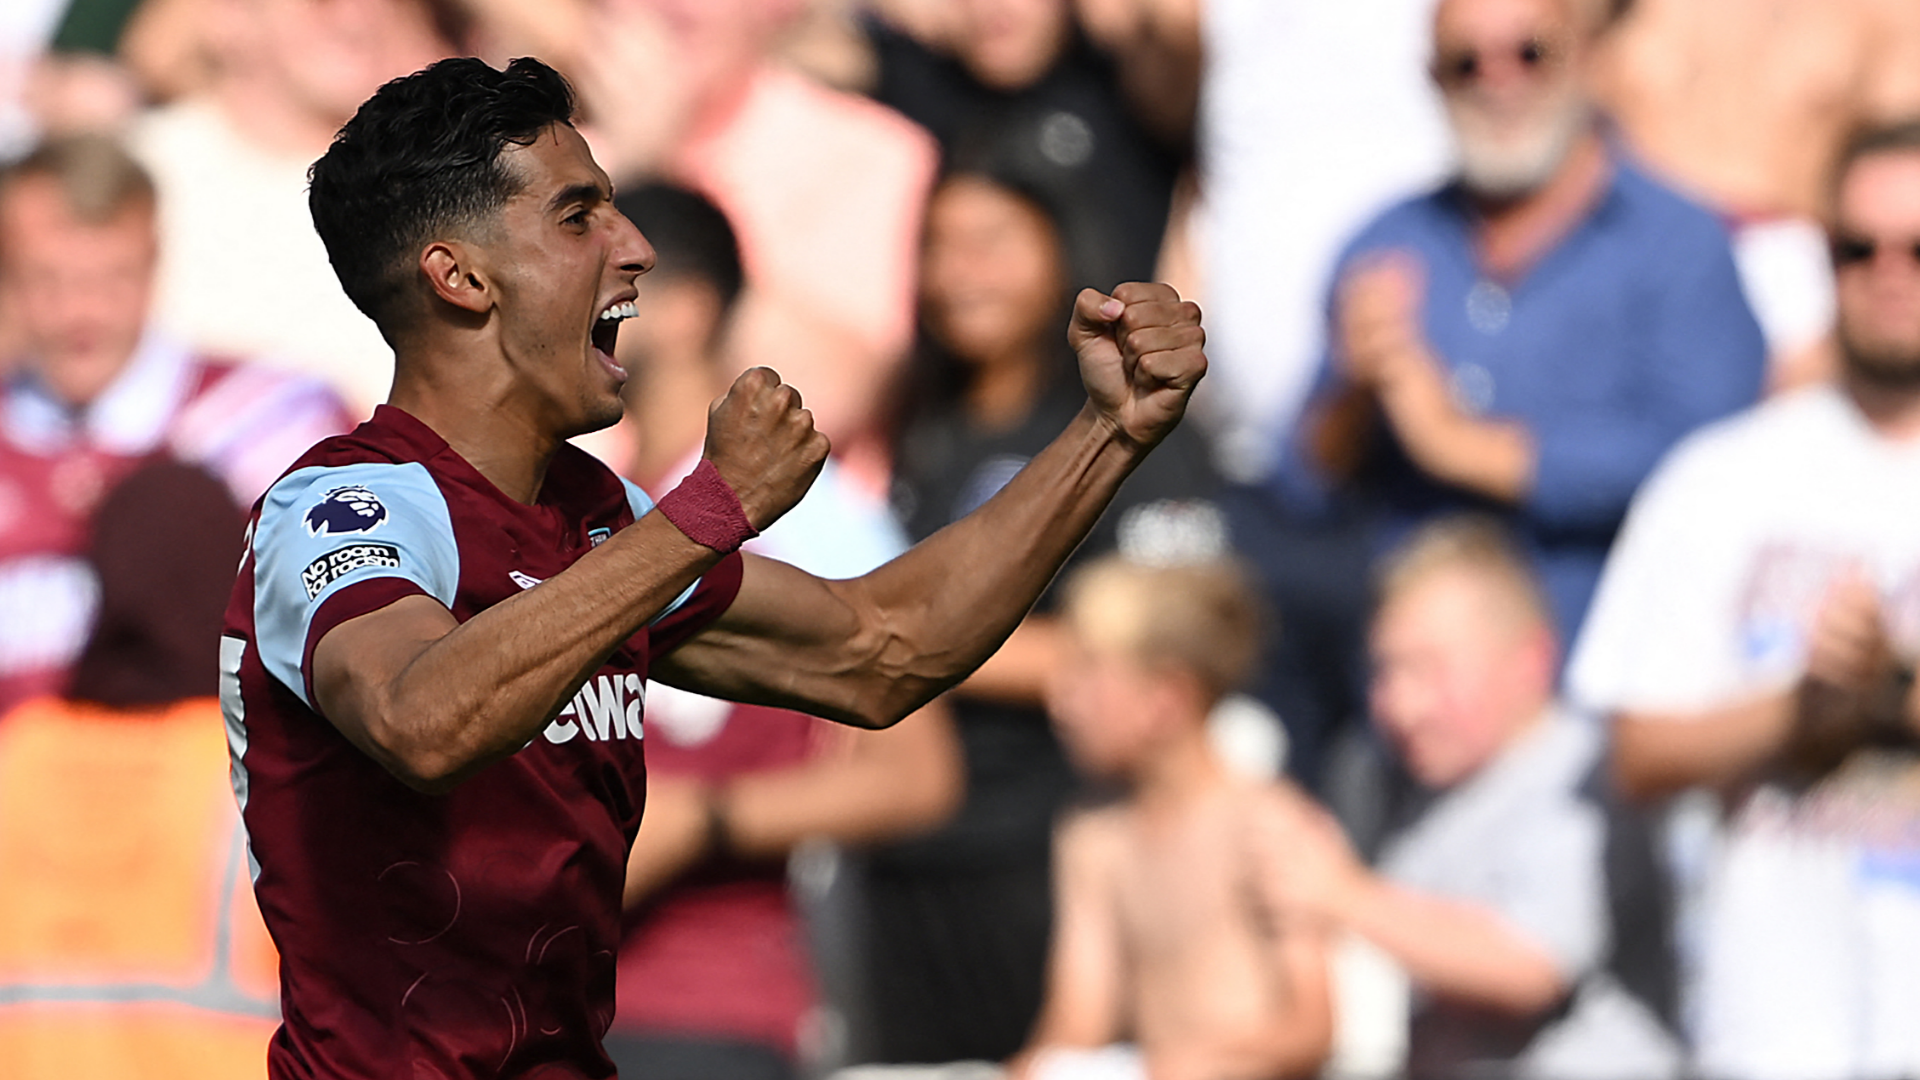 Freiburg vs West Ham Live stream, TV channel, kick-off time and where to watch Goal US